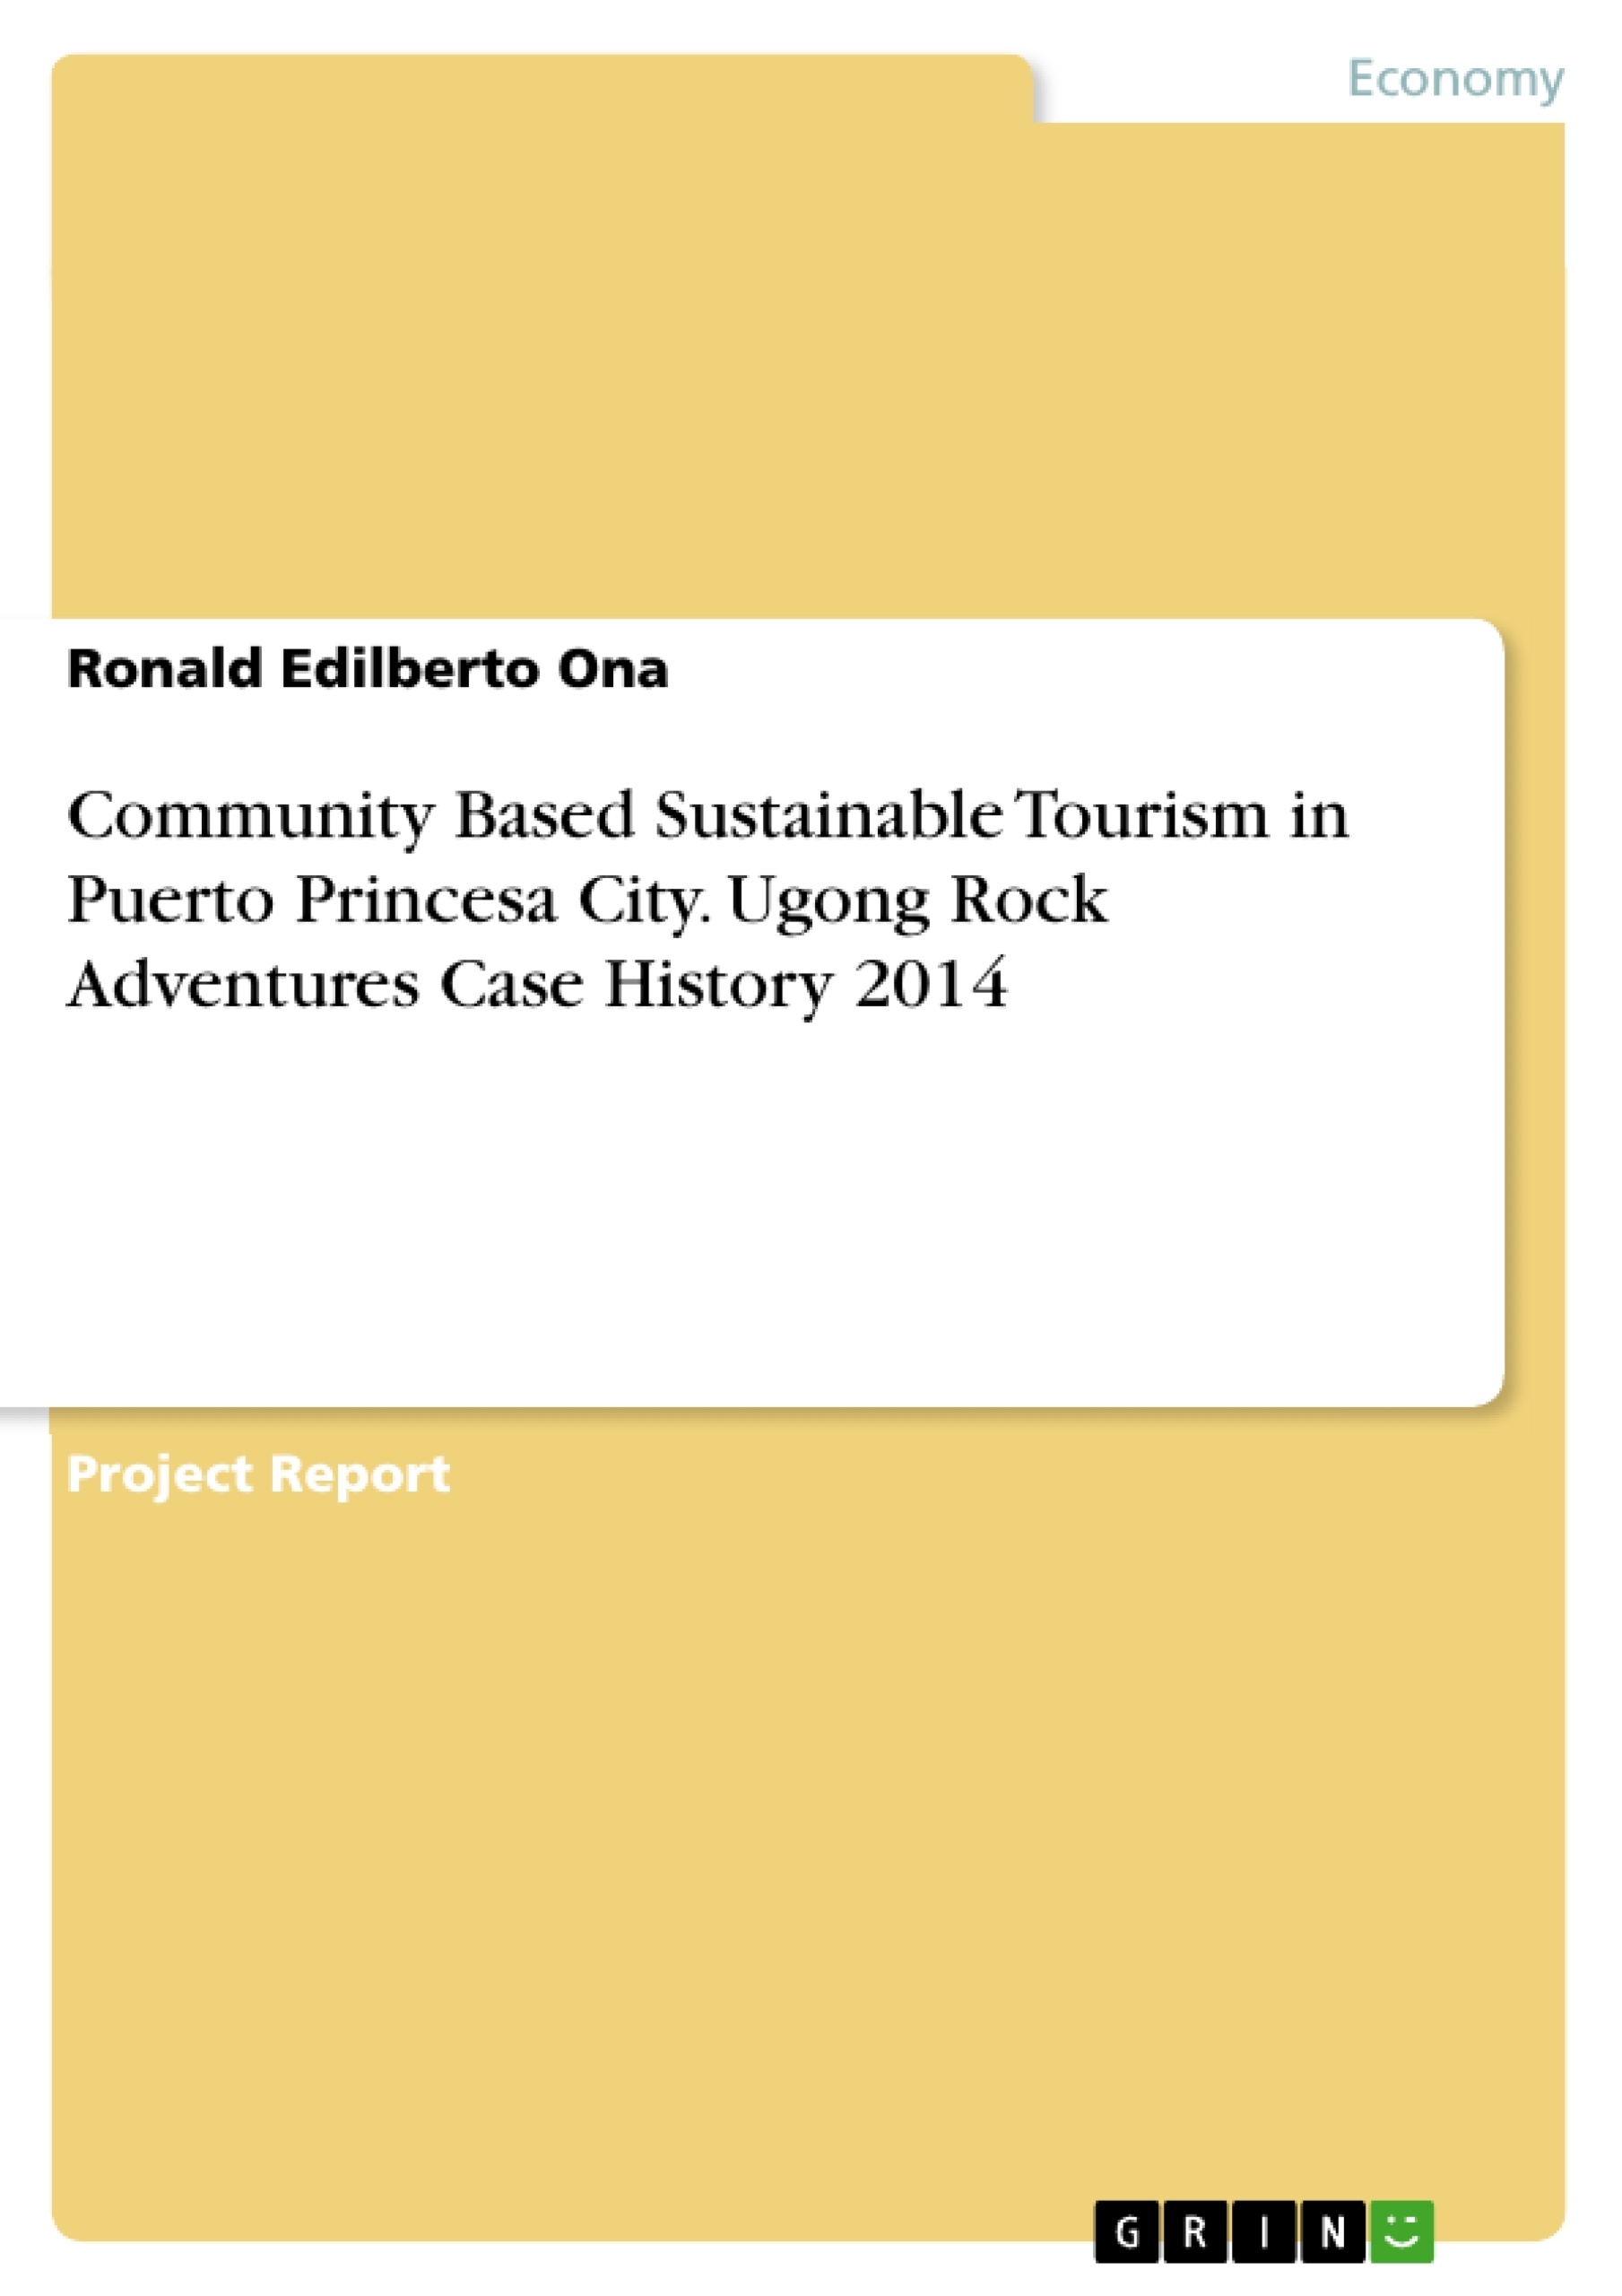 Title: Community Based Sustainable Tourism in Puerto Princesa City. Ugong Rock Adventures Case History 2014